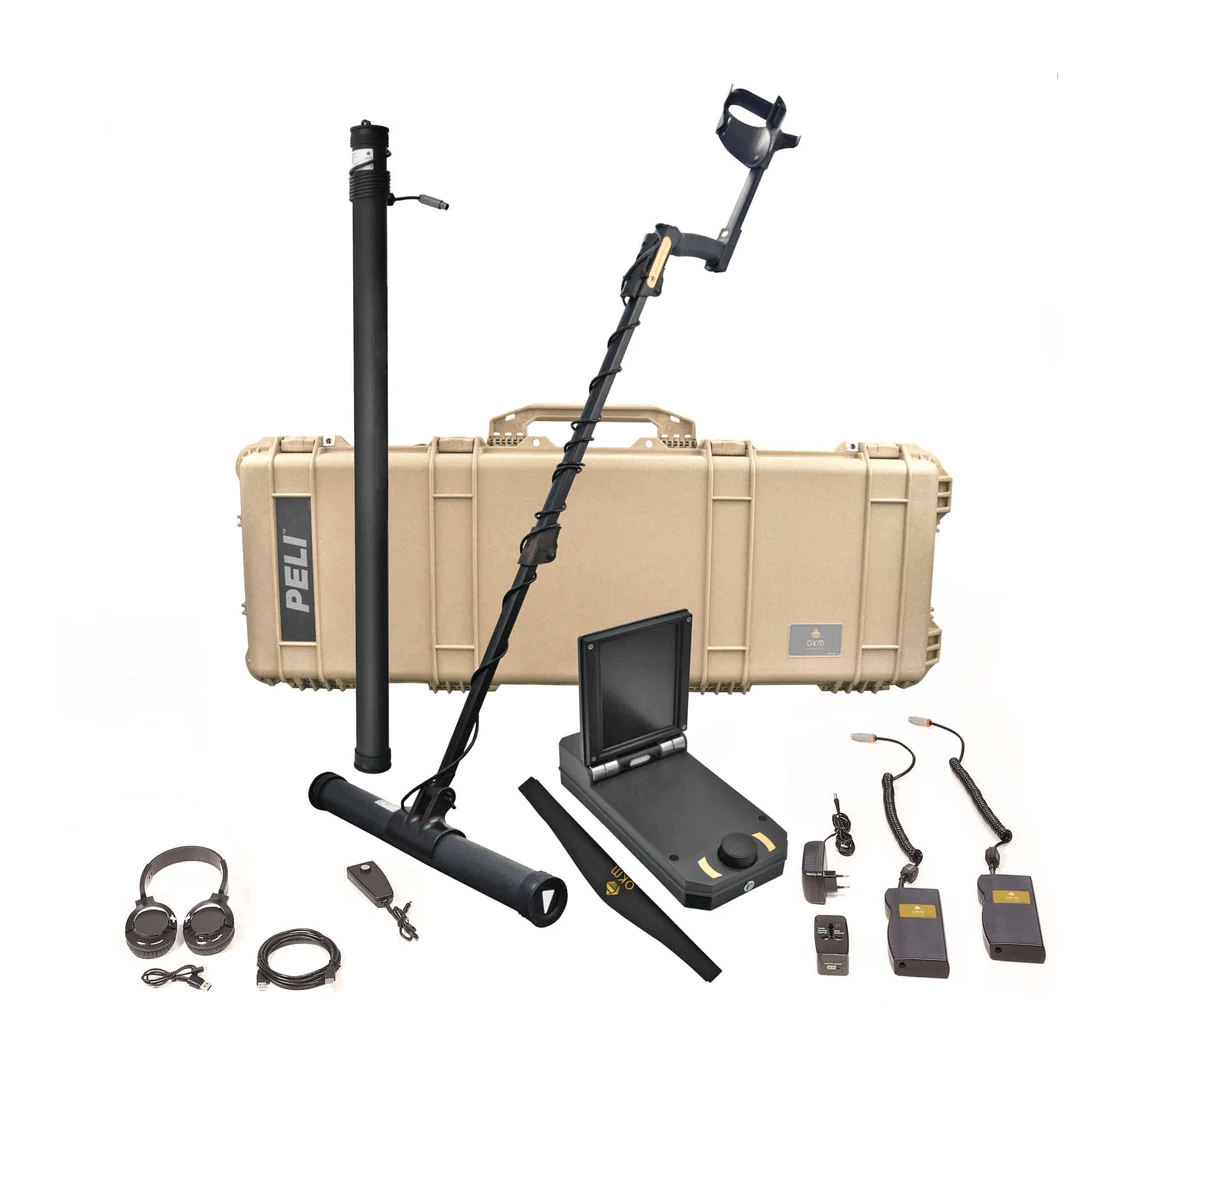 A briefcase containing the OKM eXp 4500 Professional metal detector, on a white background